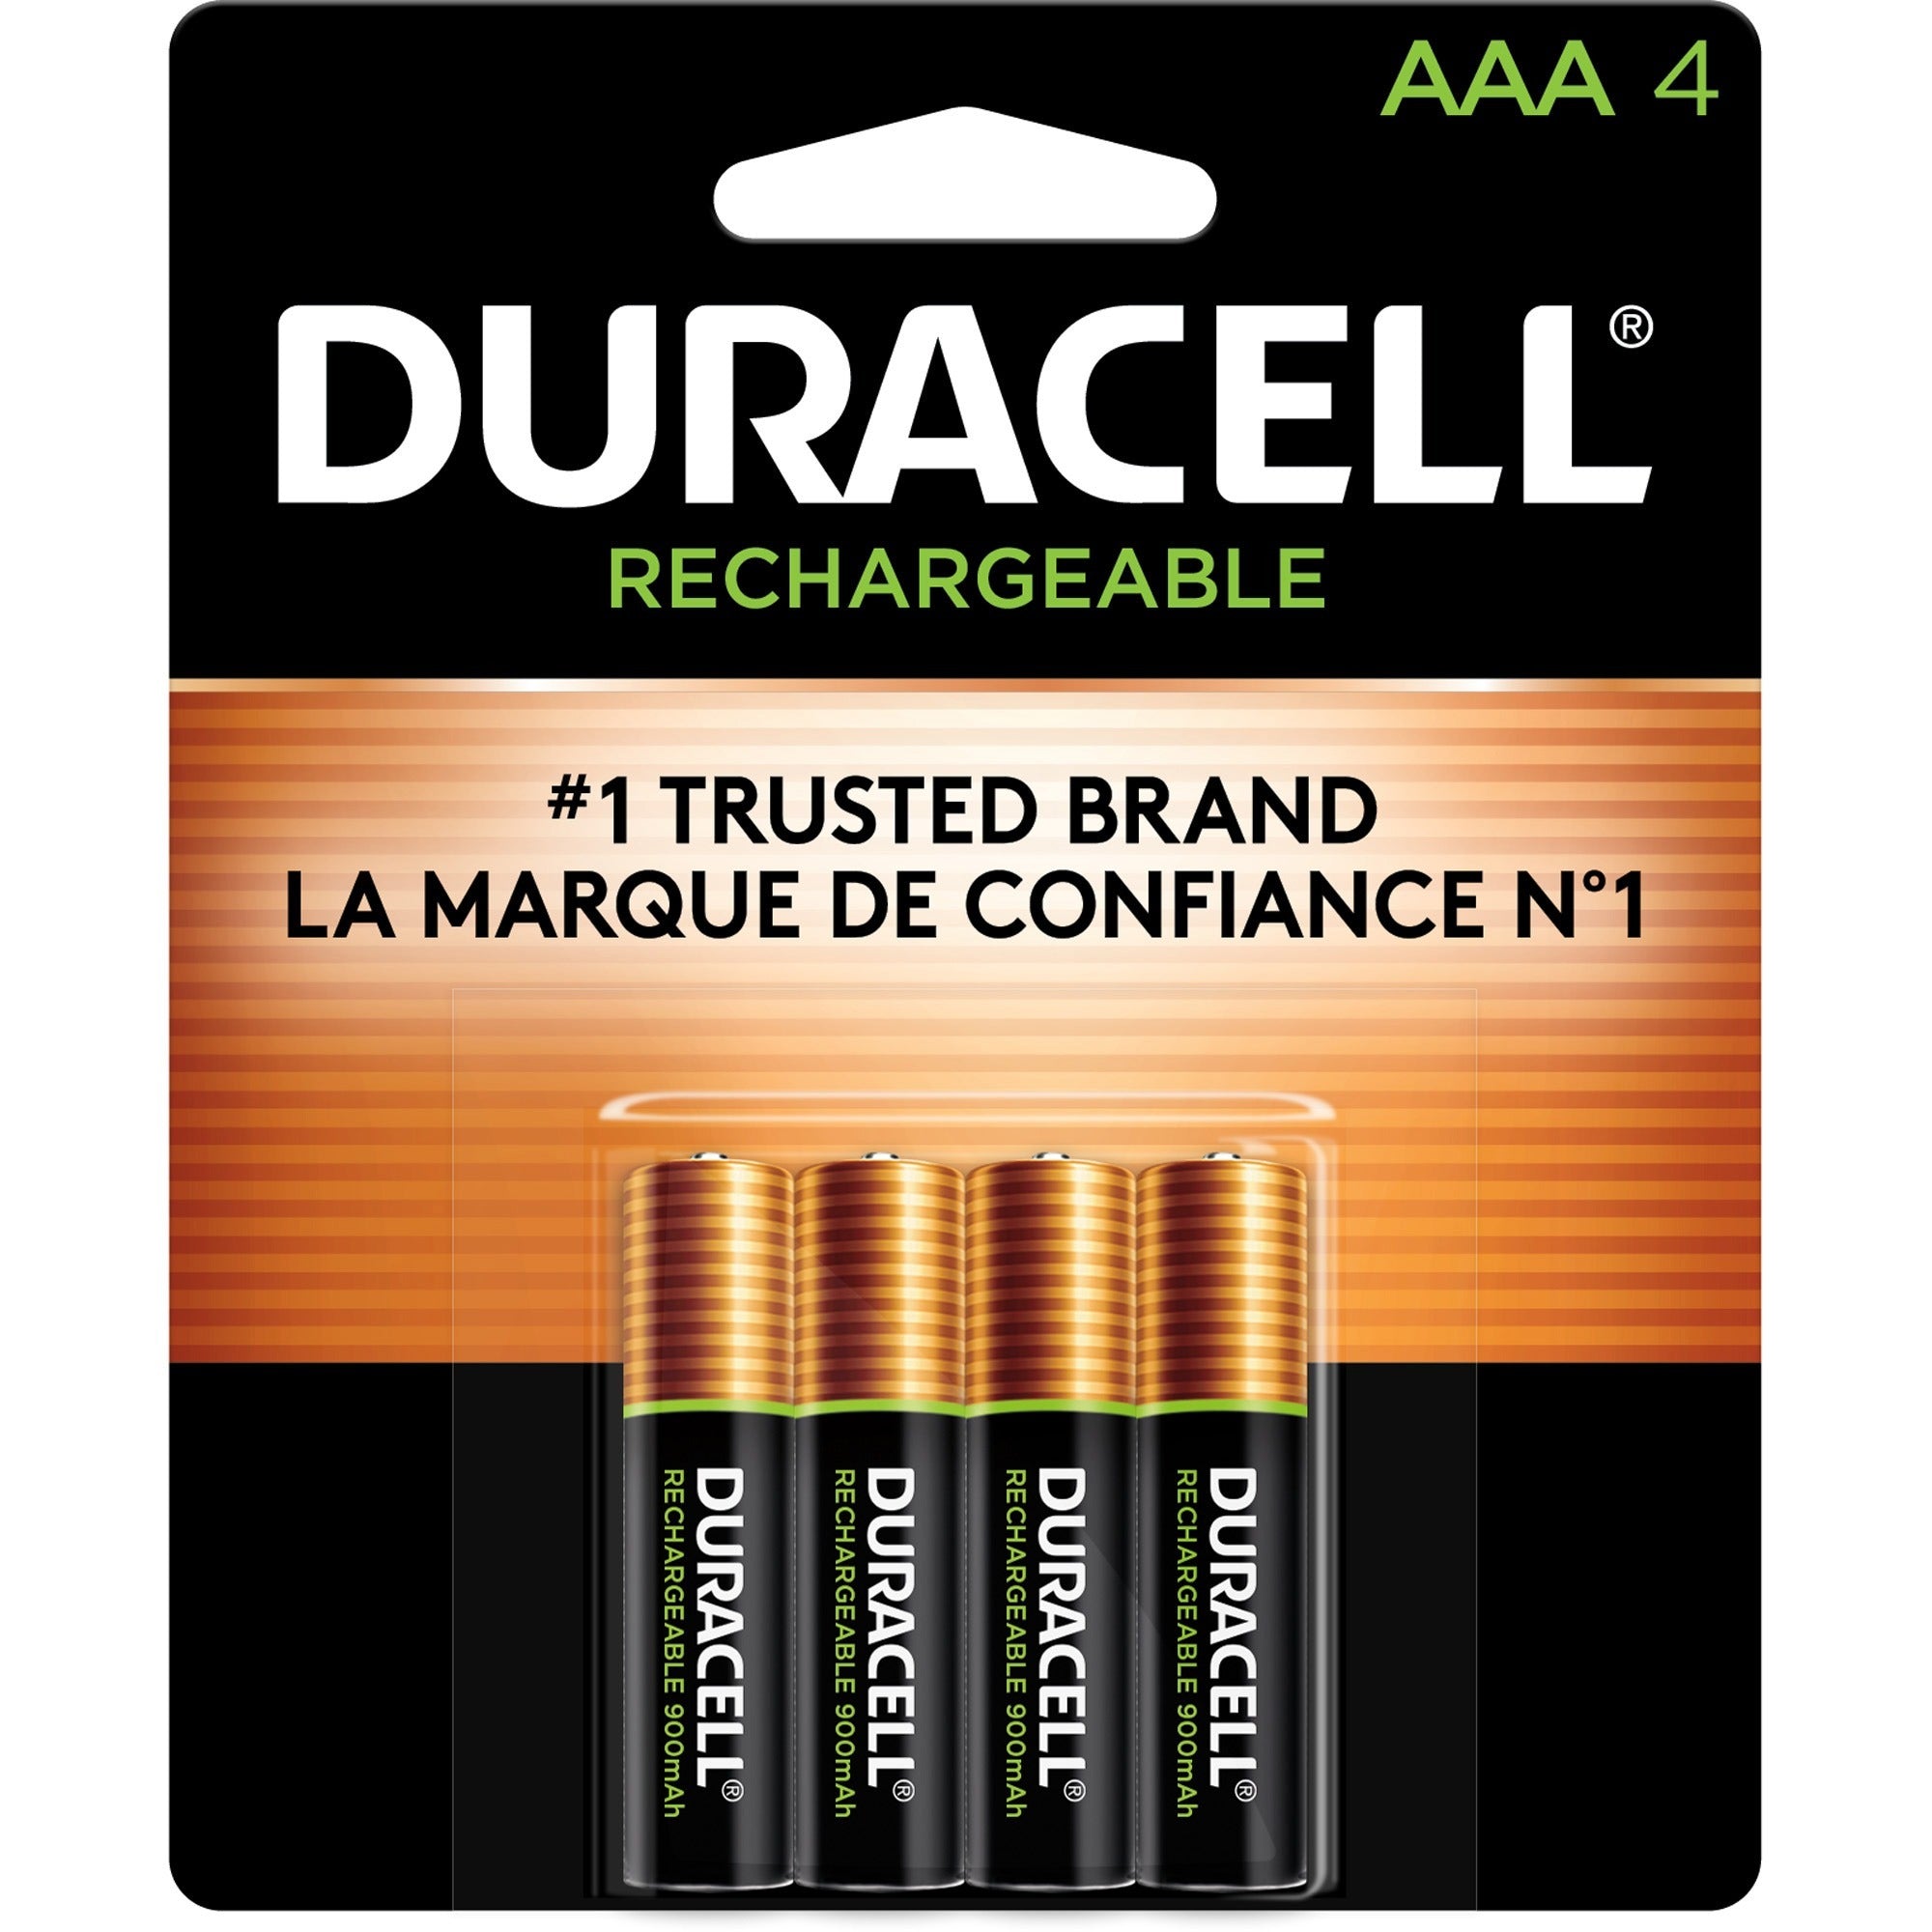 duracell-aaa-rechargeable-battery-4-packs-for-gaming-controller-flashlight-monitoring-device-battery-rechargeable-aaa-24-carton_durnlaaa4bcdct - 1